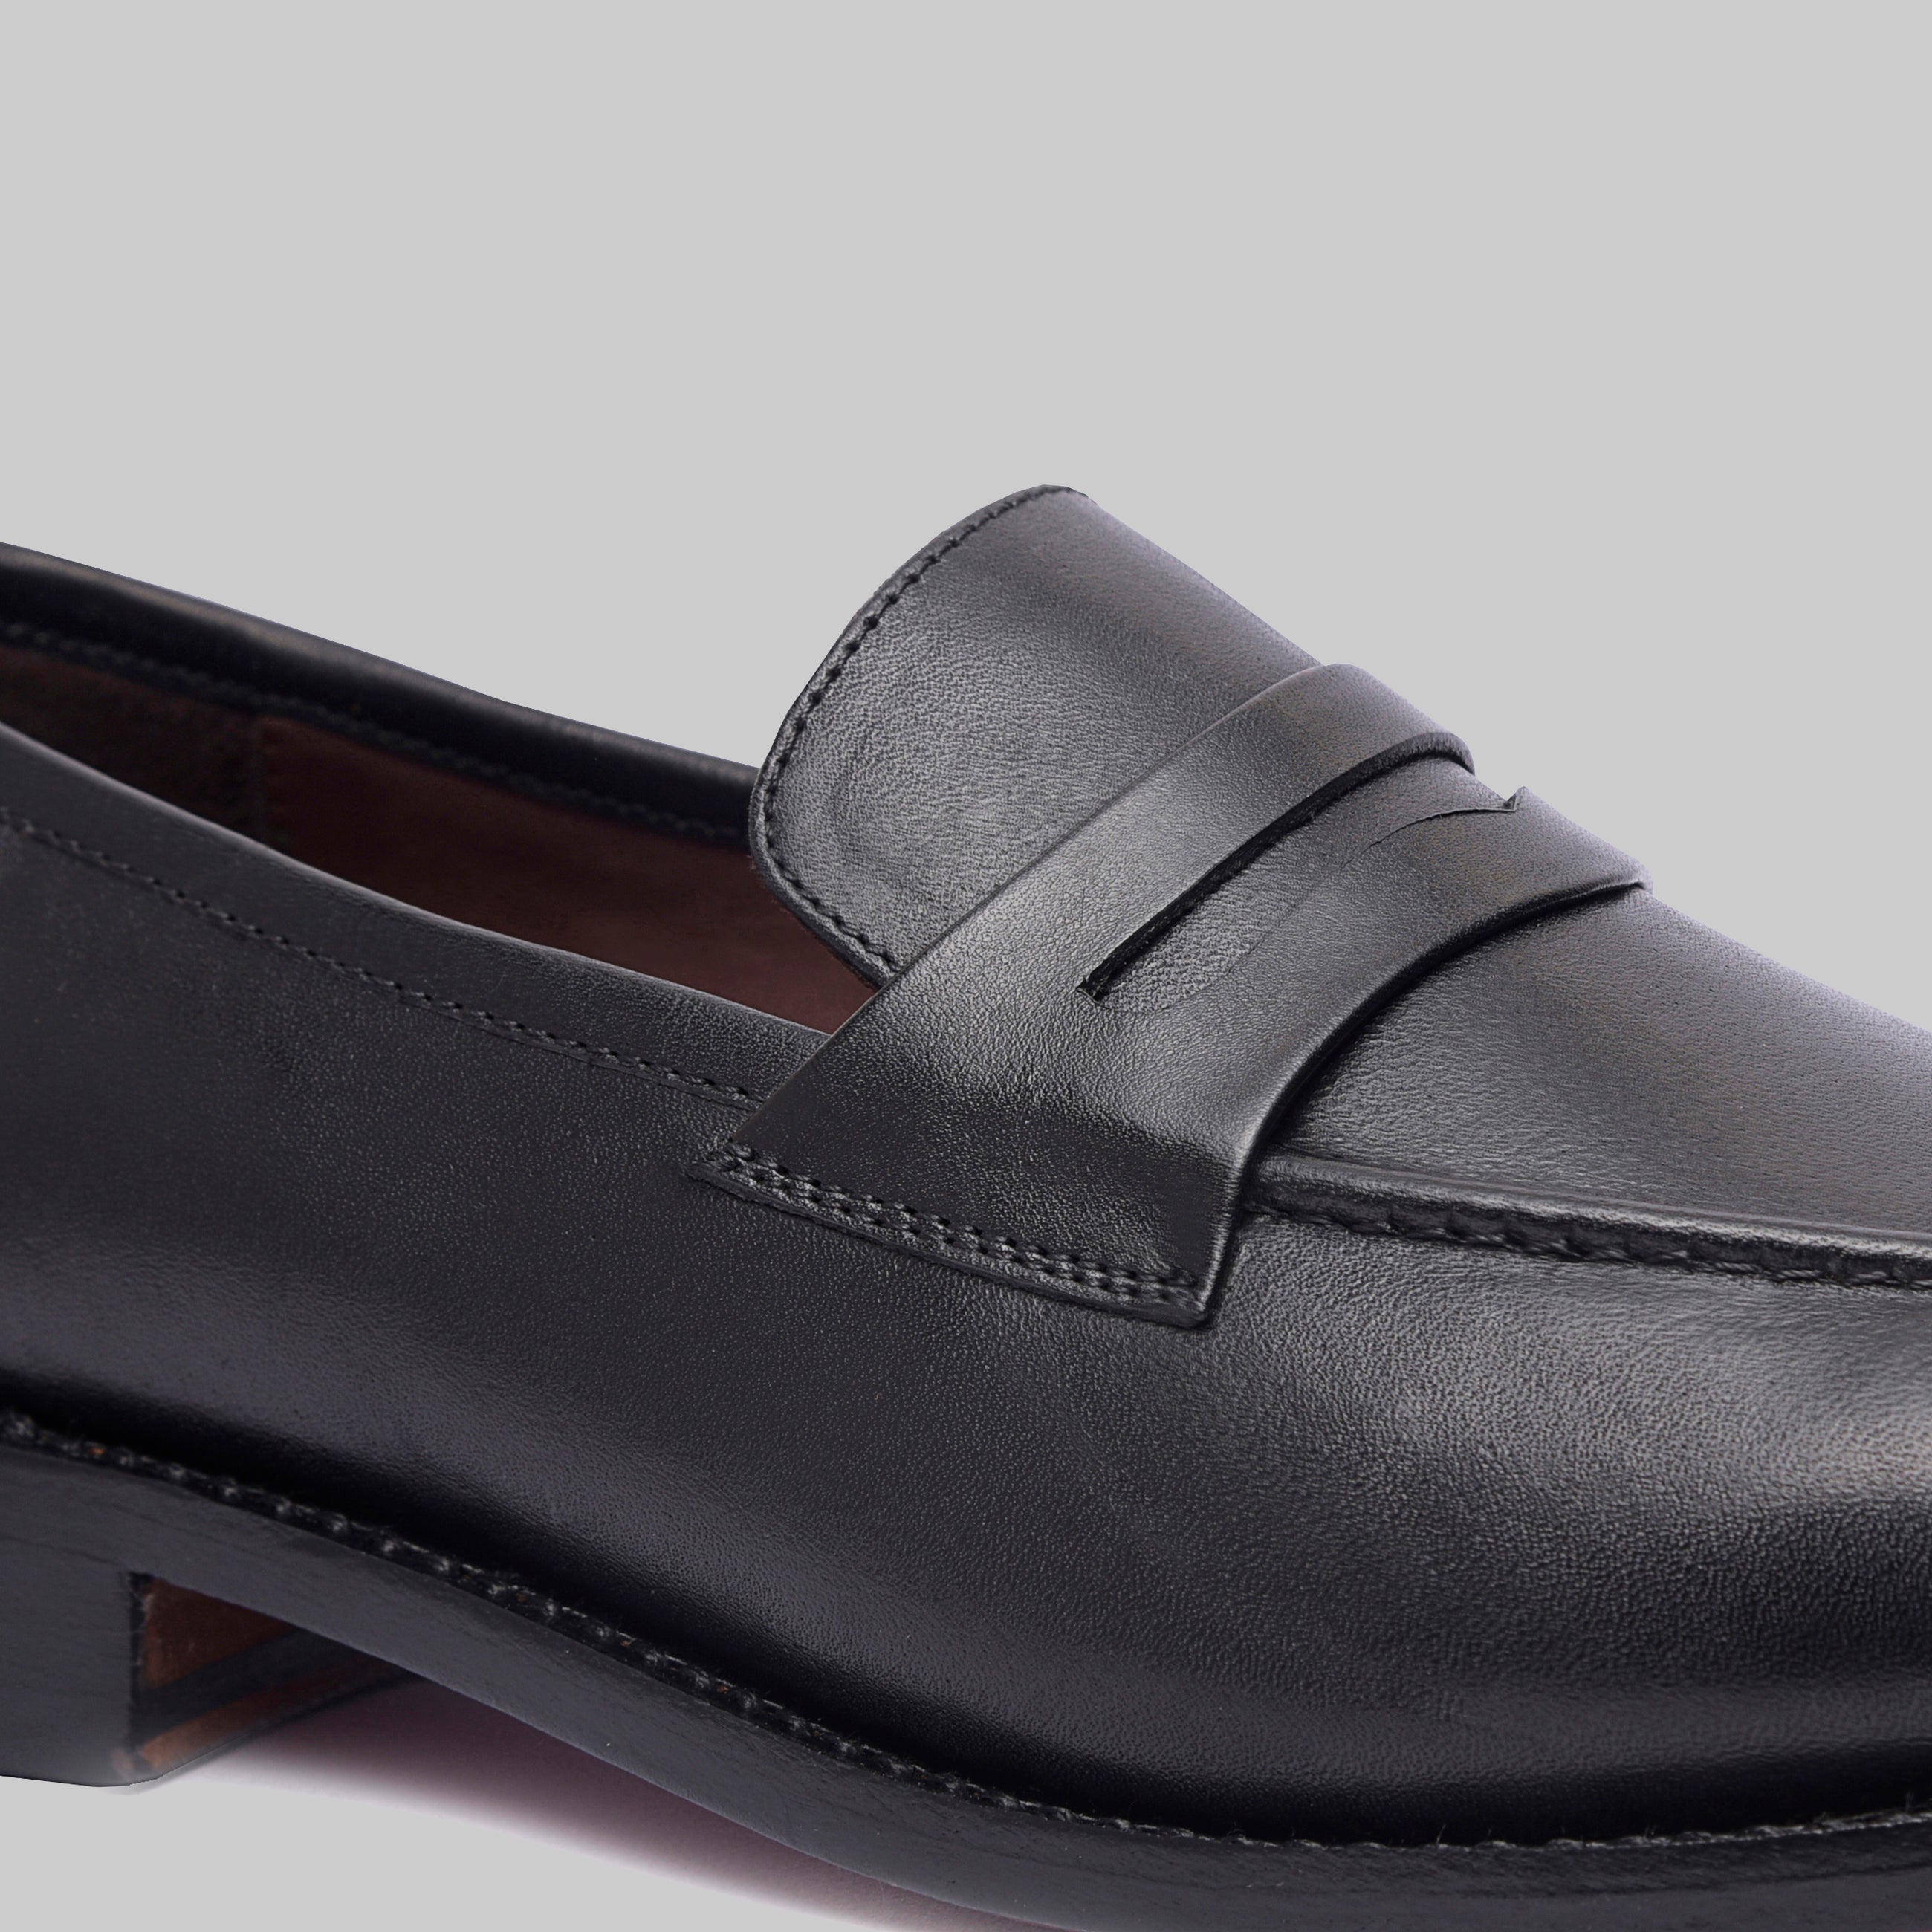 James Goodyear Welted Formal Penny Loafers